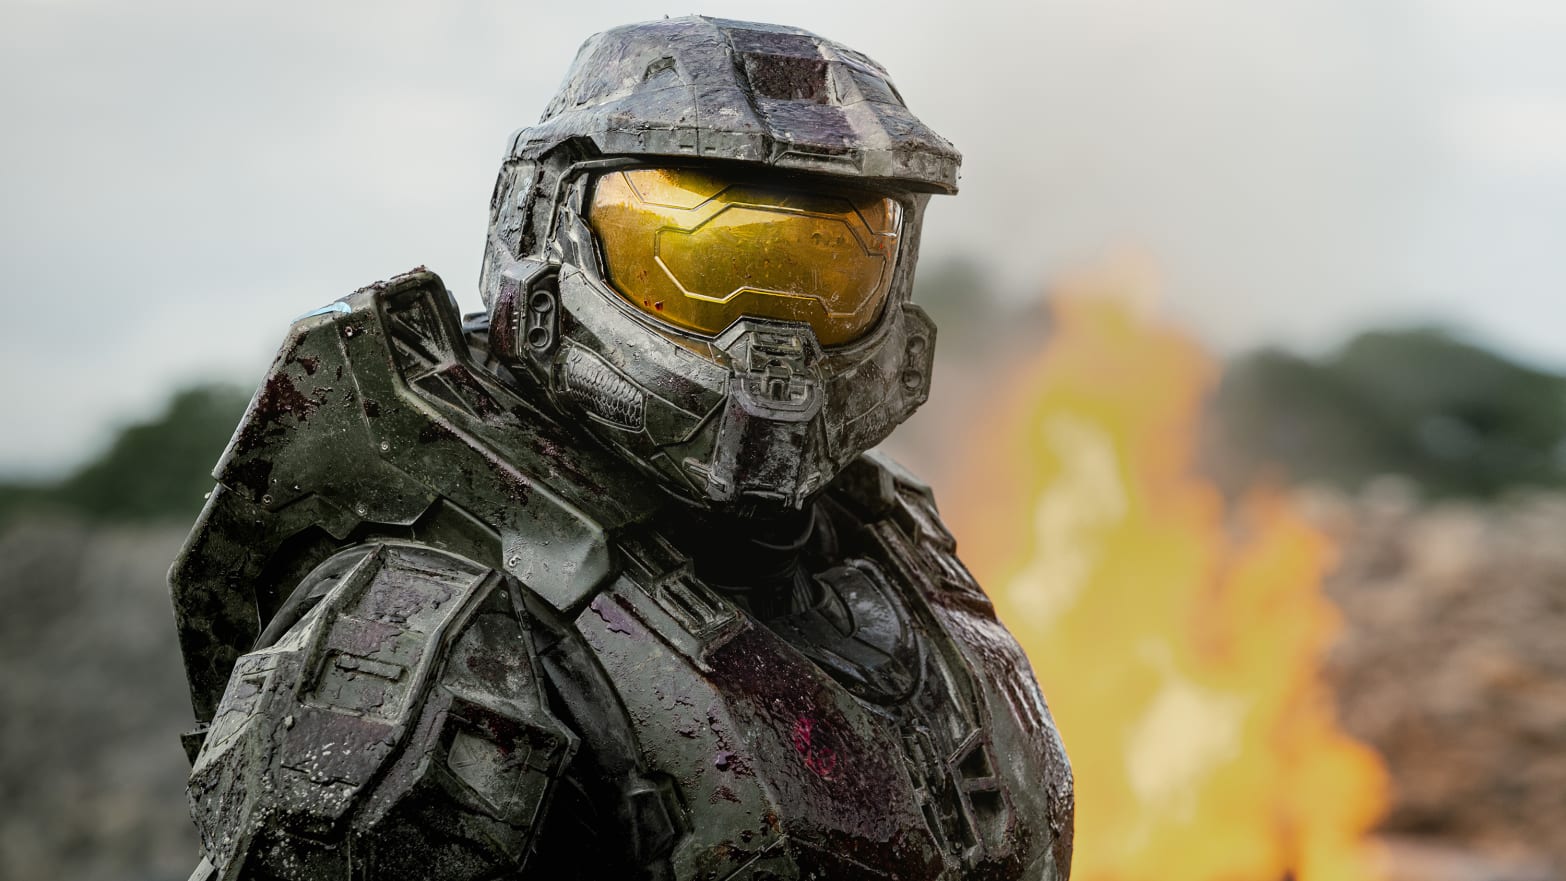 Can Steven Spielberg turn the Halo TV series into the best video